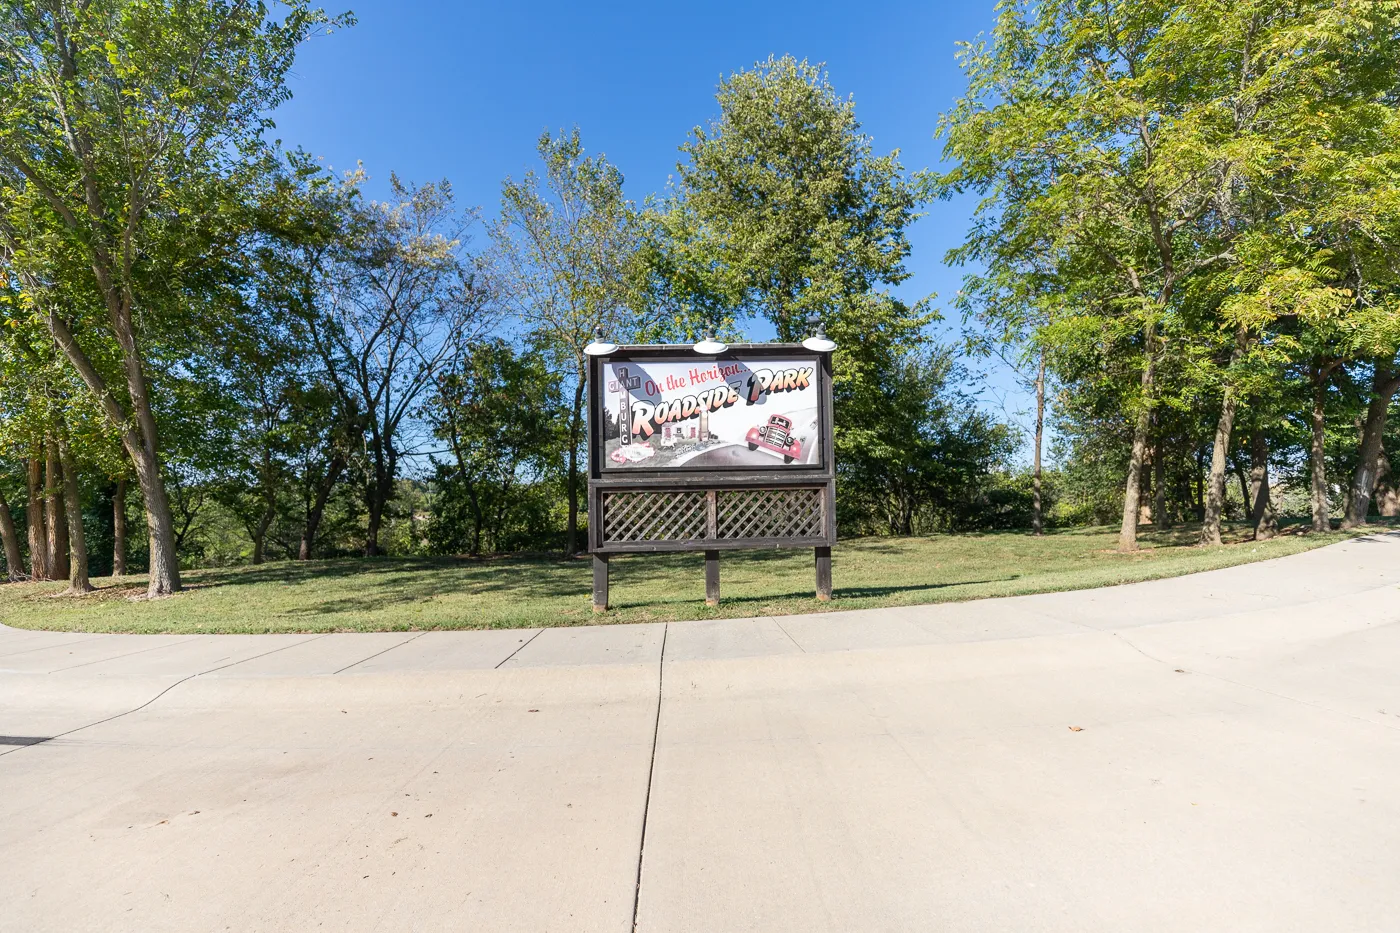 Birthplace of Route 66 Roadside Park in Springfield, Missouri